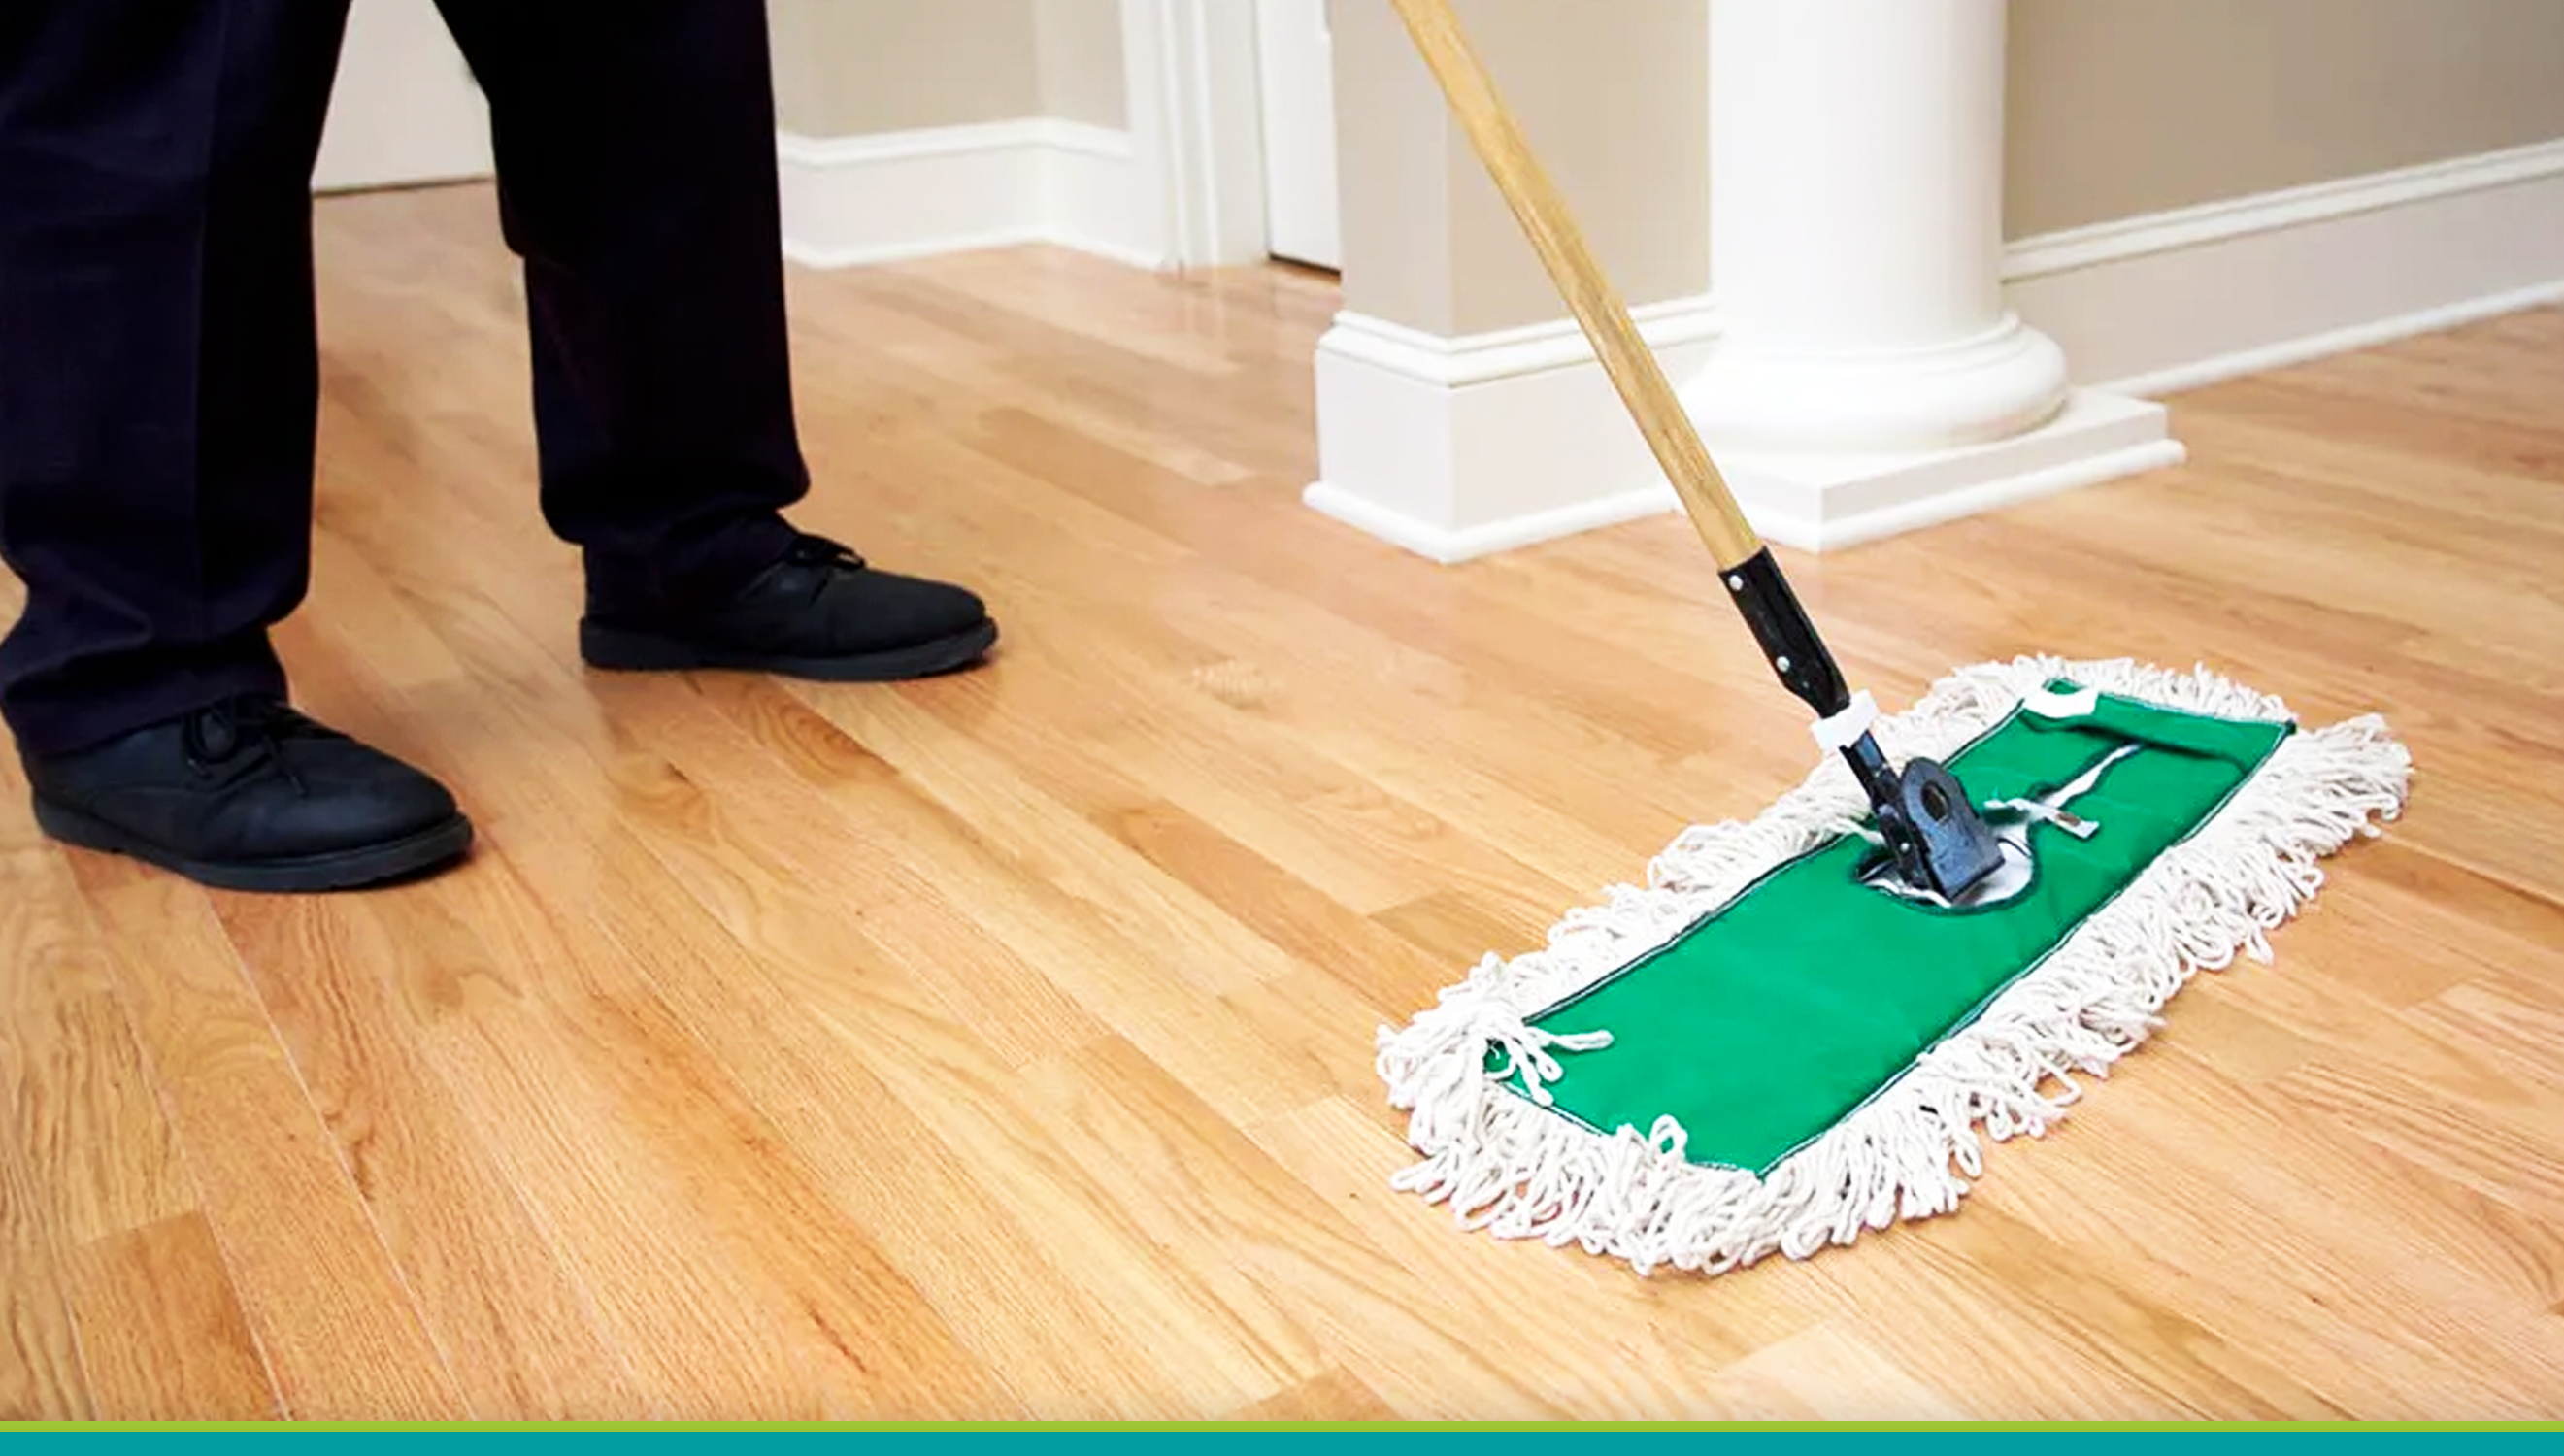 7 Tips To Clean Hardwood Floors And, How To Make Hardwood Floors Look New